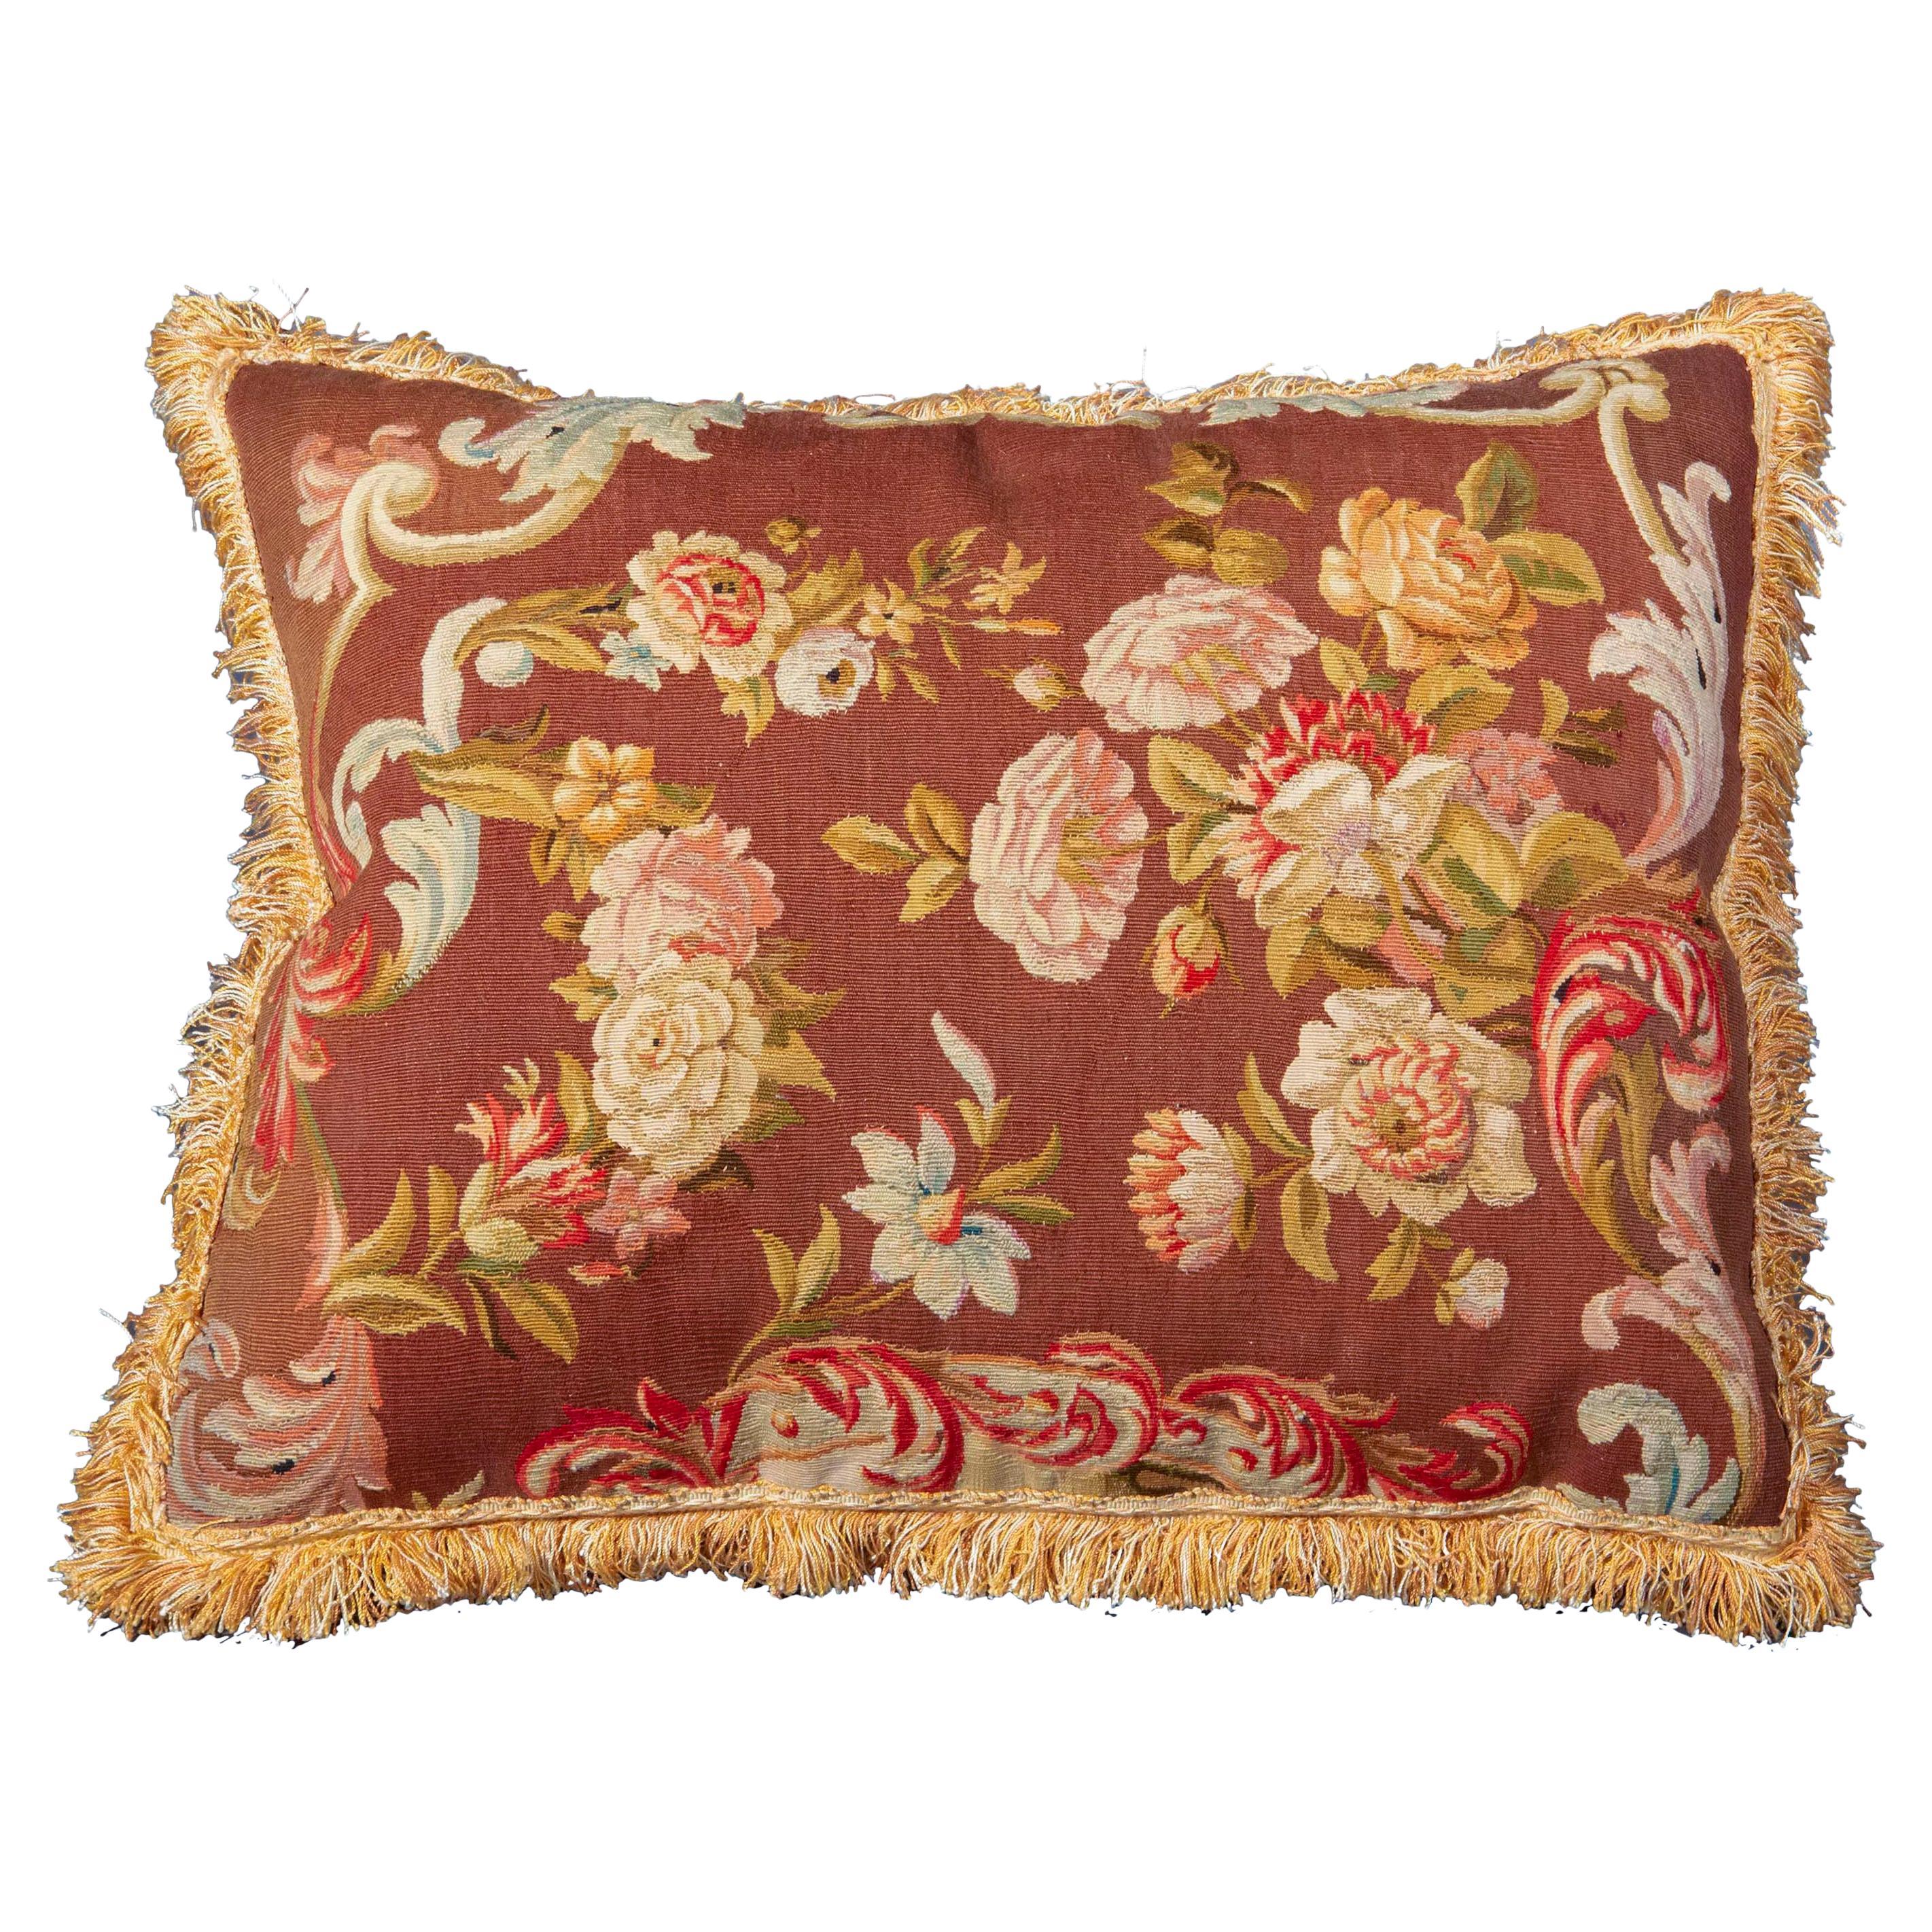 Wool Antique Tapestry Pillow or Cushion, 18th Century